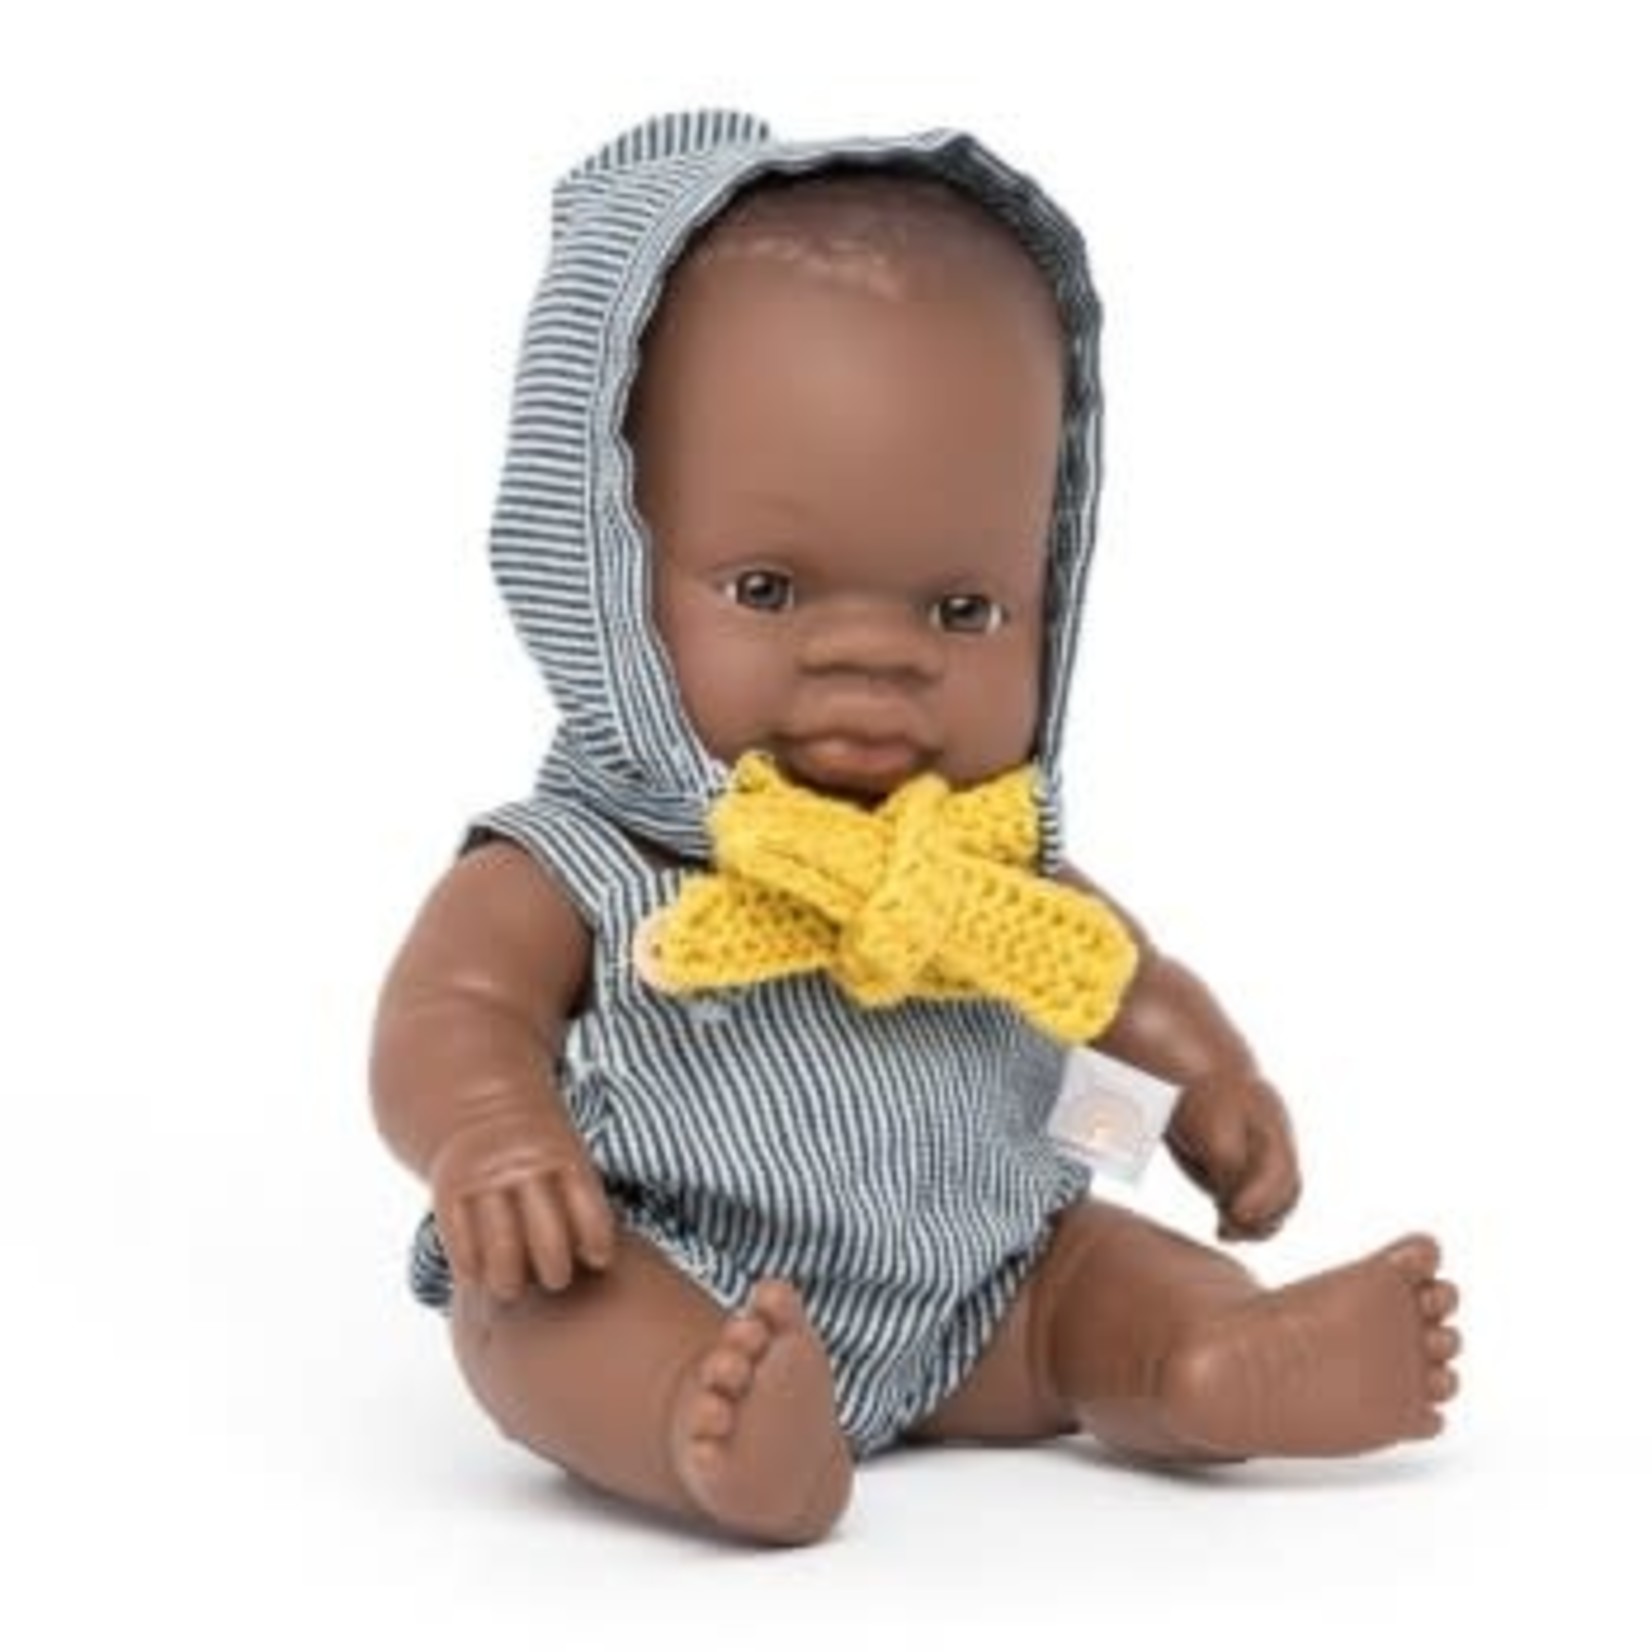 miniland 8" african baby doll